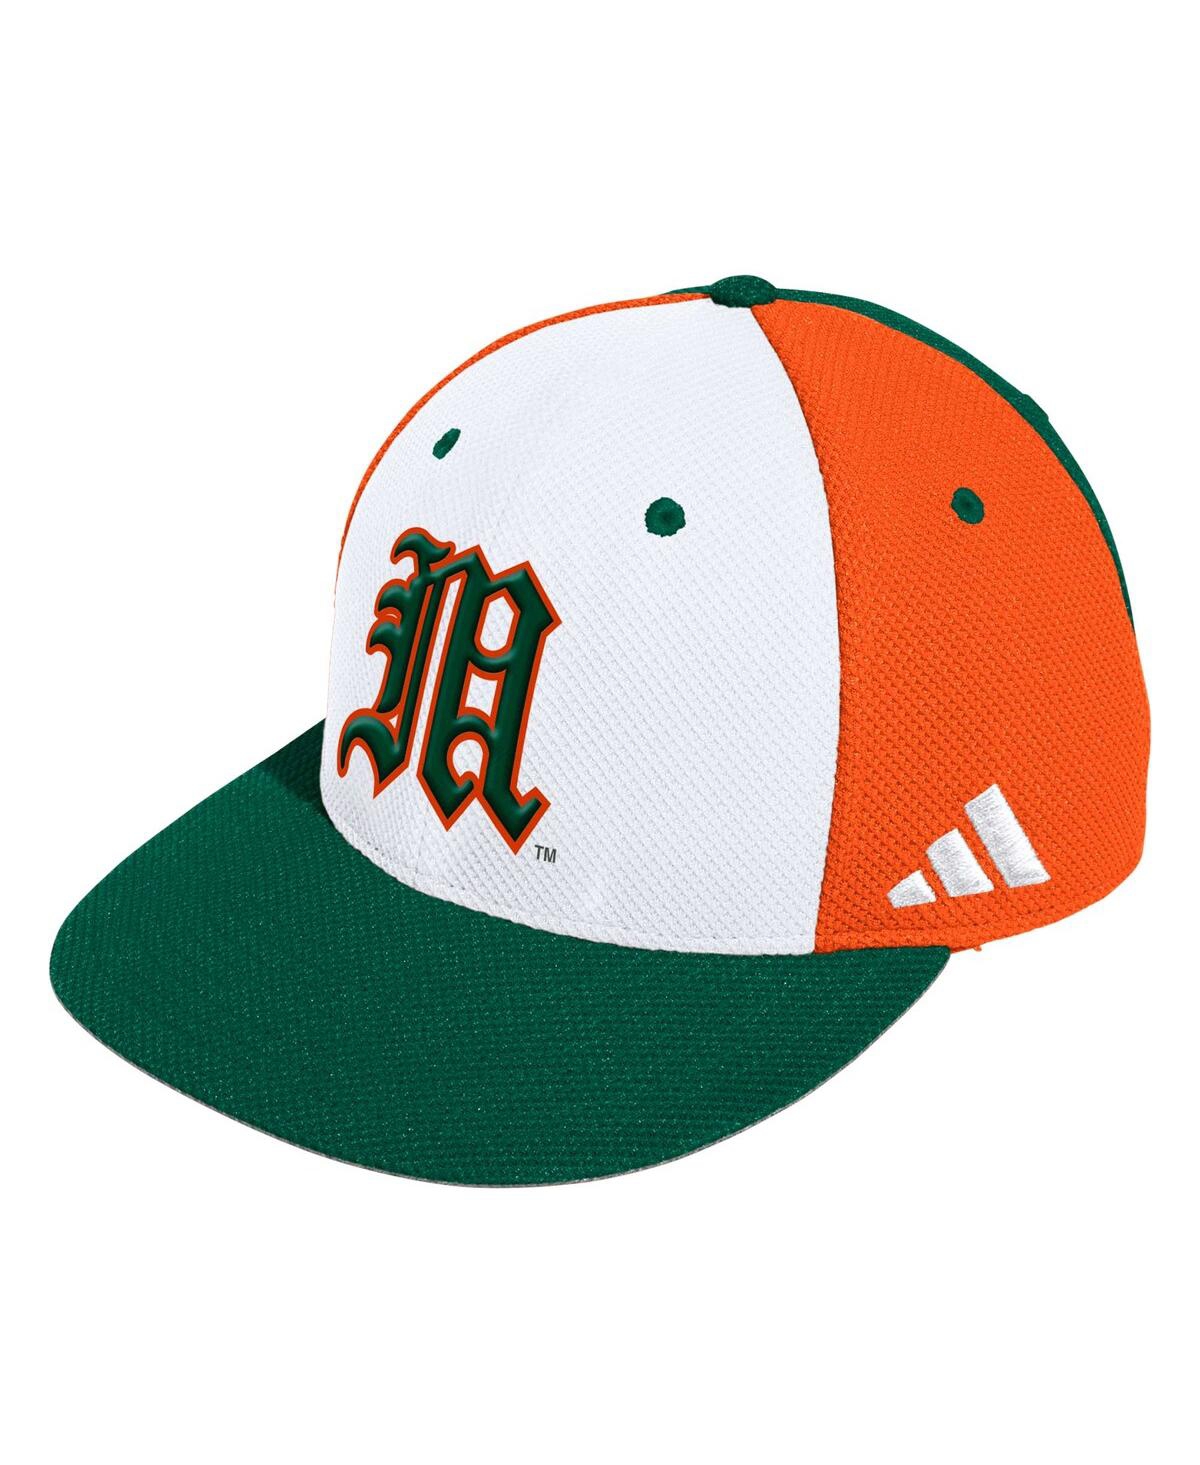 Shop Adidas Originals Men's Adidas White Miami Hurricanes On-field Baseball Fitted Hat